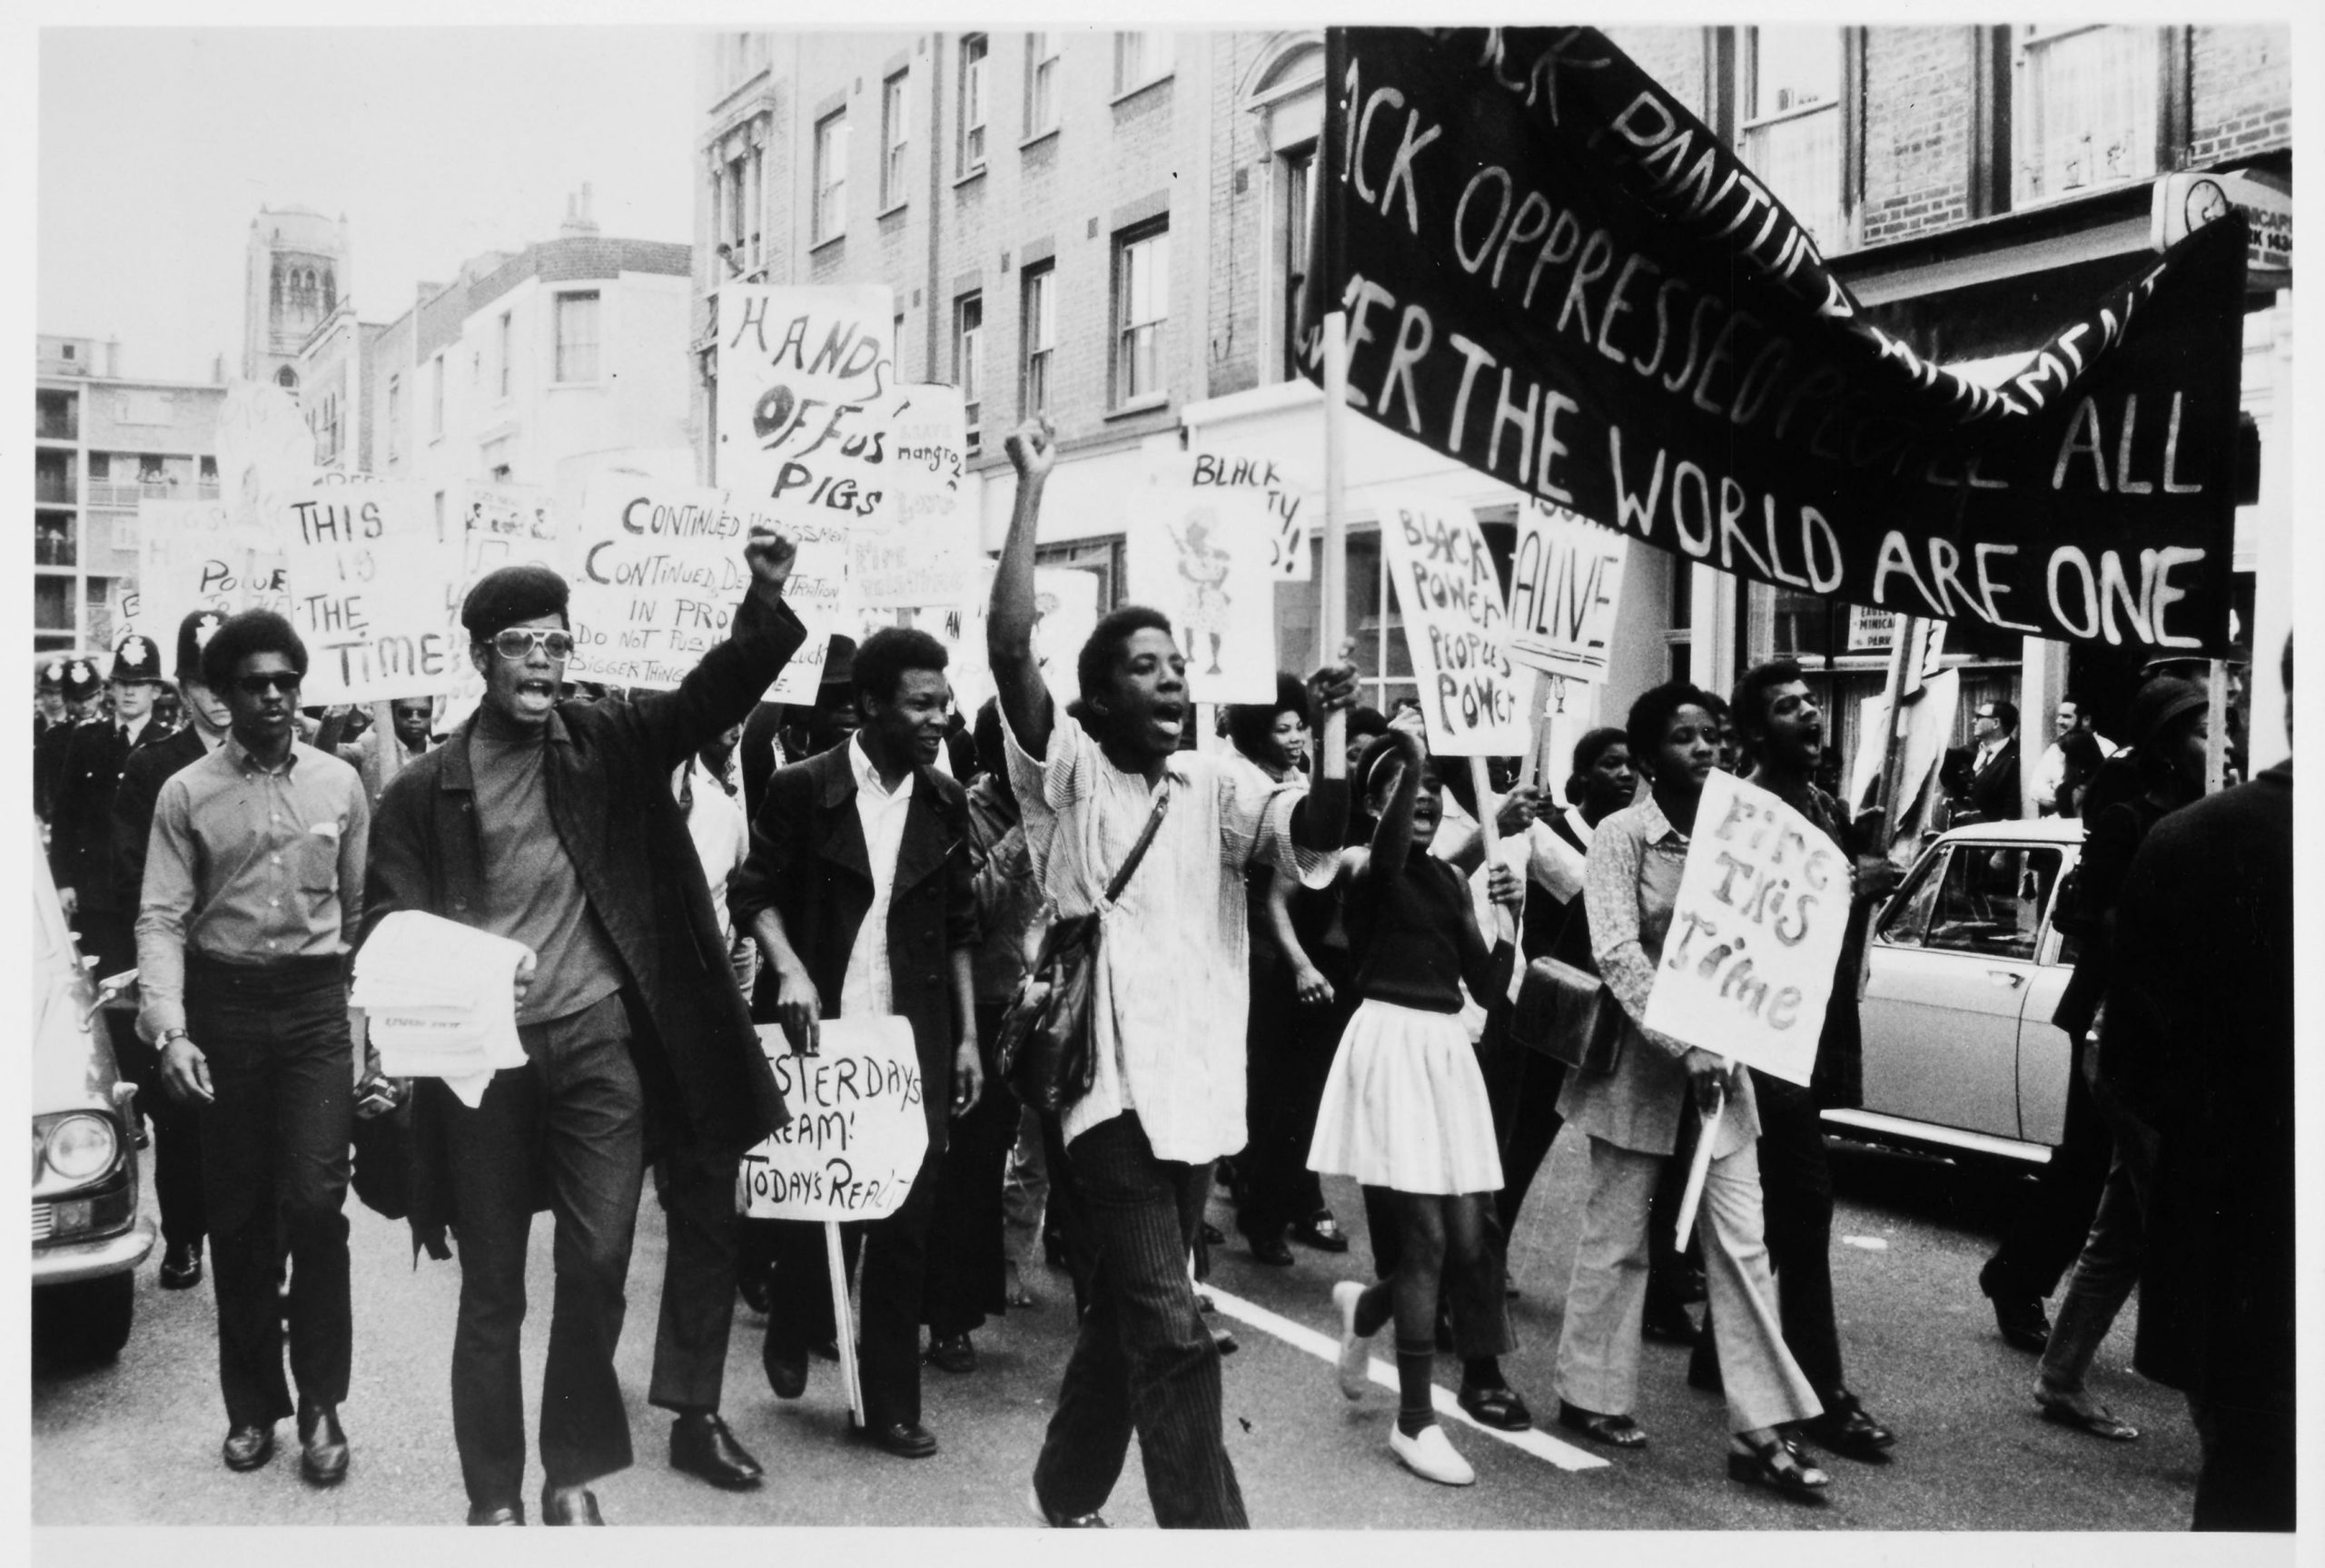 Monochrome photograph of a protest in which a group of Black British people walk forwards while holding placards with messages against police oppression. A group of police officers follow behind.